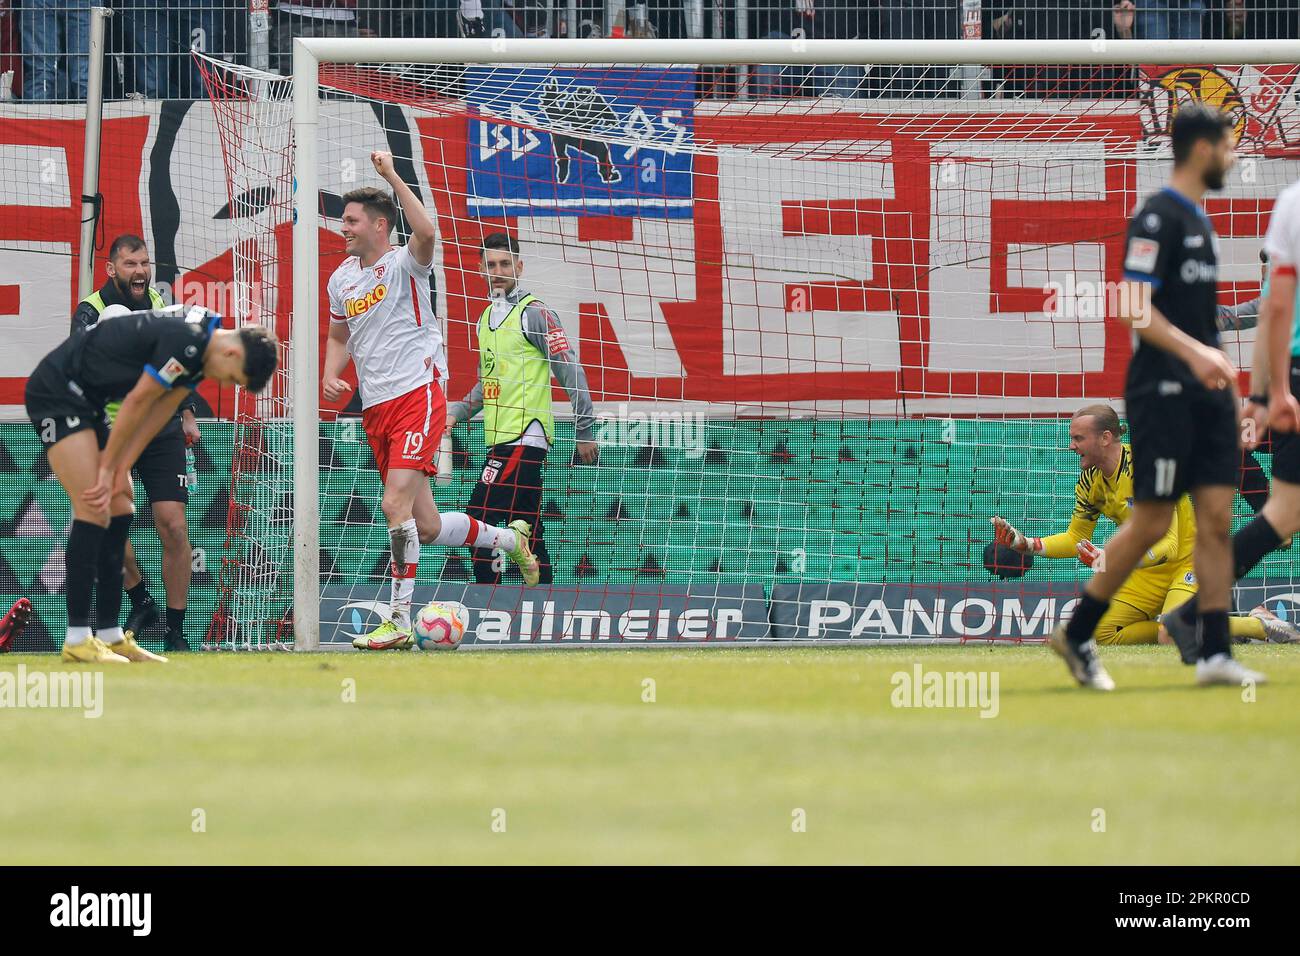 Regensburg, Germany. 09th Apr, 2023. Soccer: 2nd Bundesliga, Jahn Regensburg - 1. FC Magdeburg, Matchday 27, Jahnstadion Regensburg. Andreas Albers (2nd from left) from Regensburg celebrates his goal to make it 1:1, Magdeburg goalkeeper Dominik Reimann (r) is annoyed. Credit: Daniel Löb/dpa - IMPORTANT NOTE: In accordance with the requirements of the DFL Deutsche Fußball Liga and the DFB Deutscher Fußball-Bund, it is prohibited to use or have used photographs taken in the stadium and/or of the match in the form of sequence pictures and/or video-like photo series./dpa/Alamy Live News Stock Photo